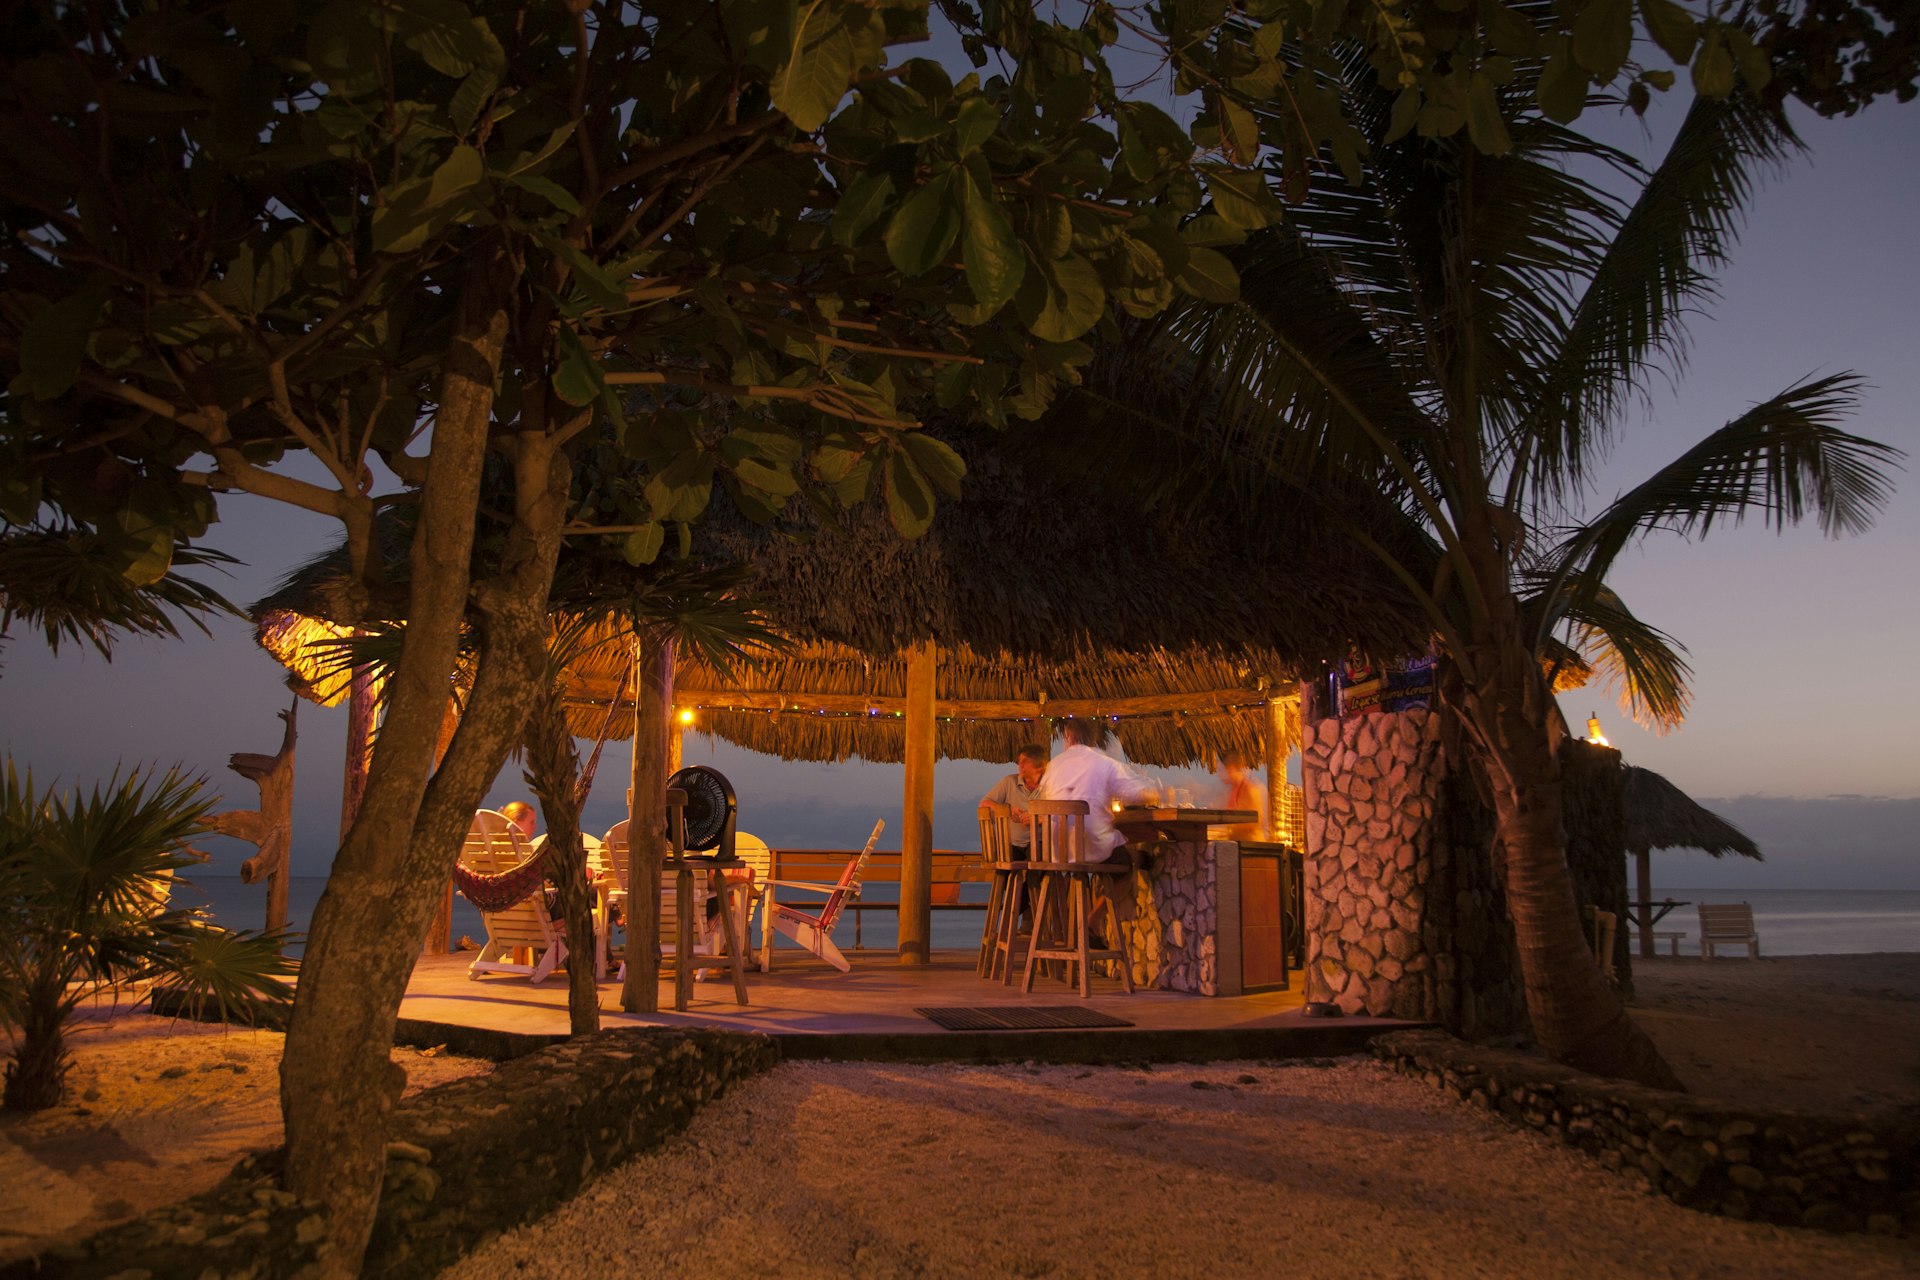 People at a beachside bar in a thatched-roof palapa hut at sunset on Utila, Honduras 